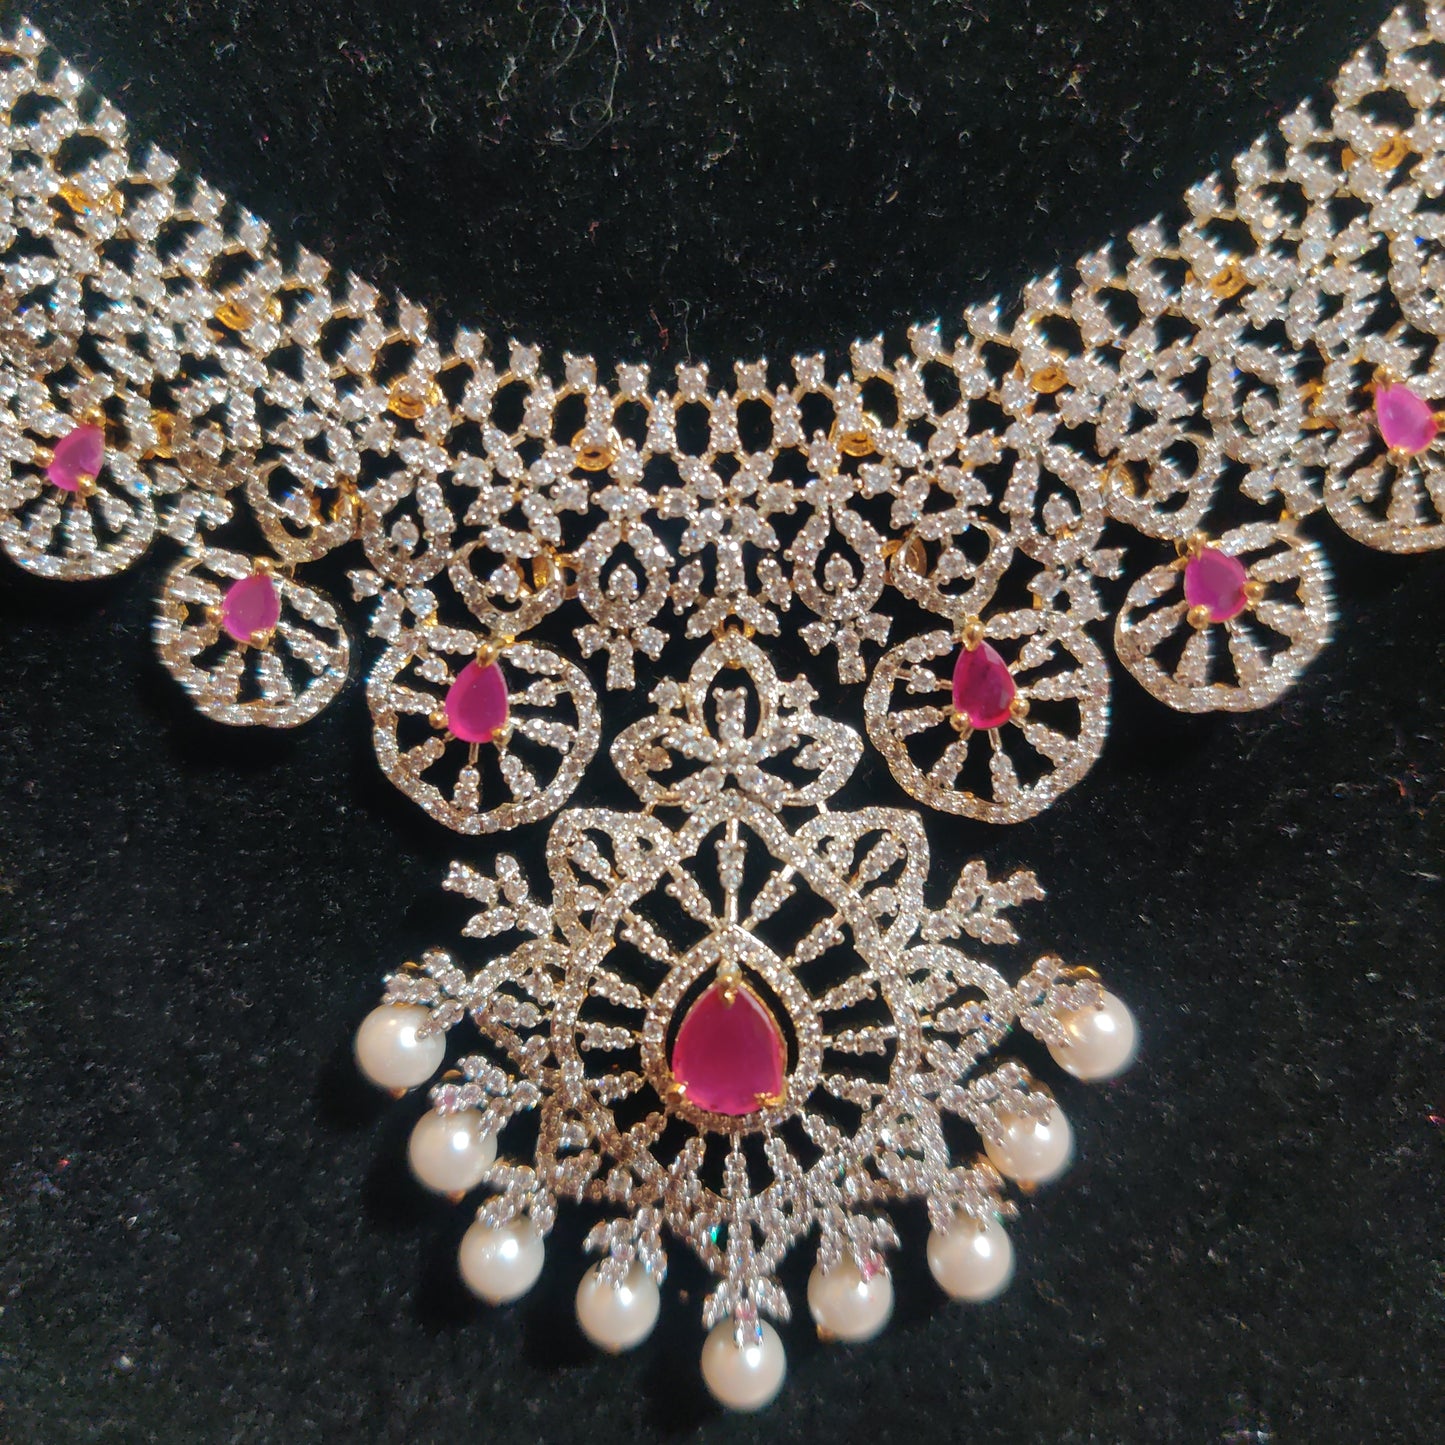 Attractive Pink stoned Desinger Long Beaded Necklace With Earrings In Tempe